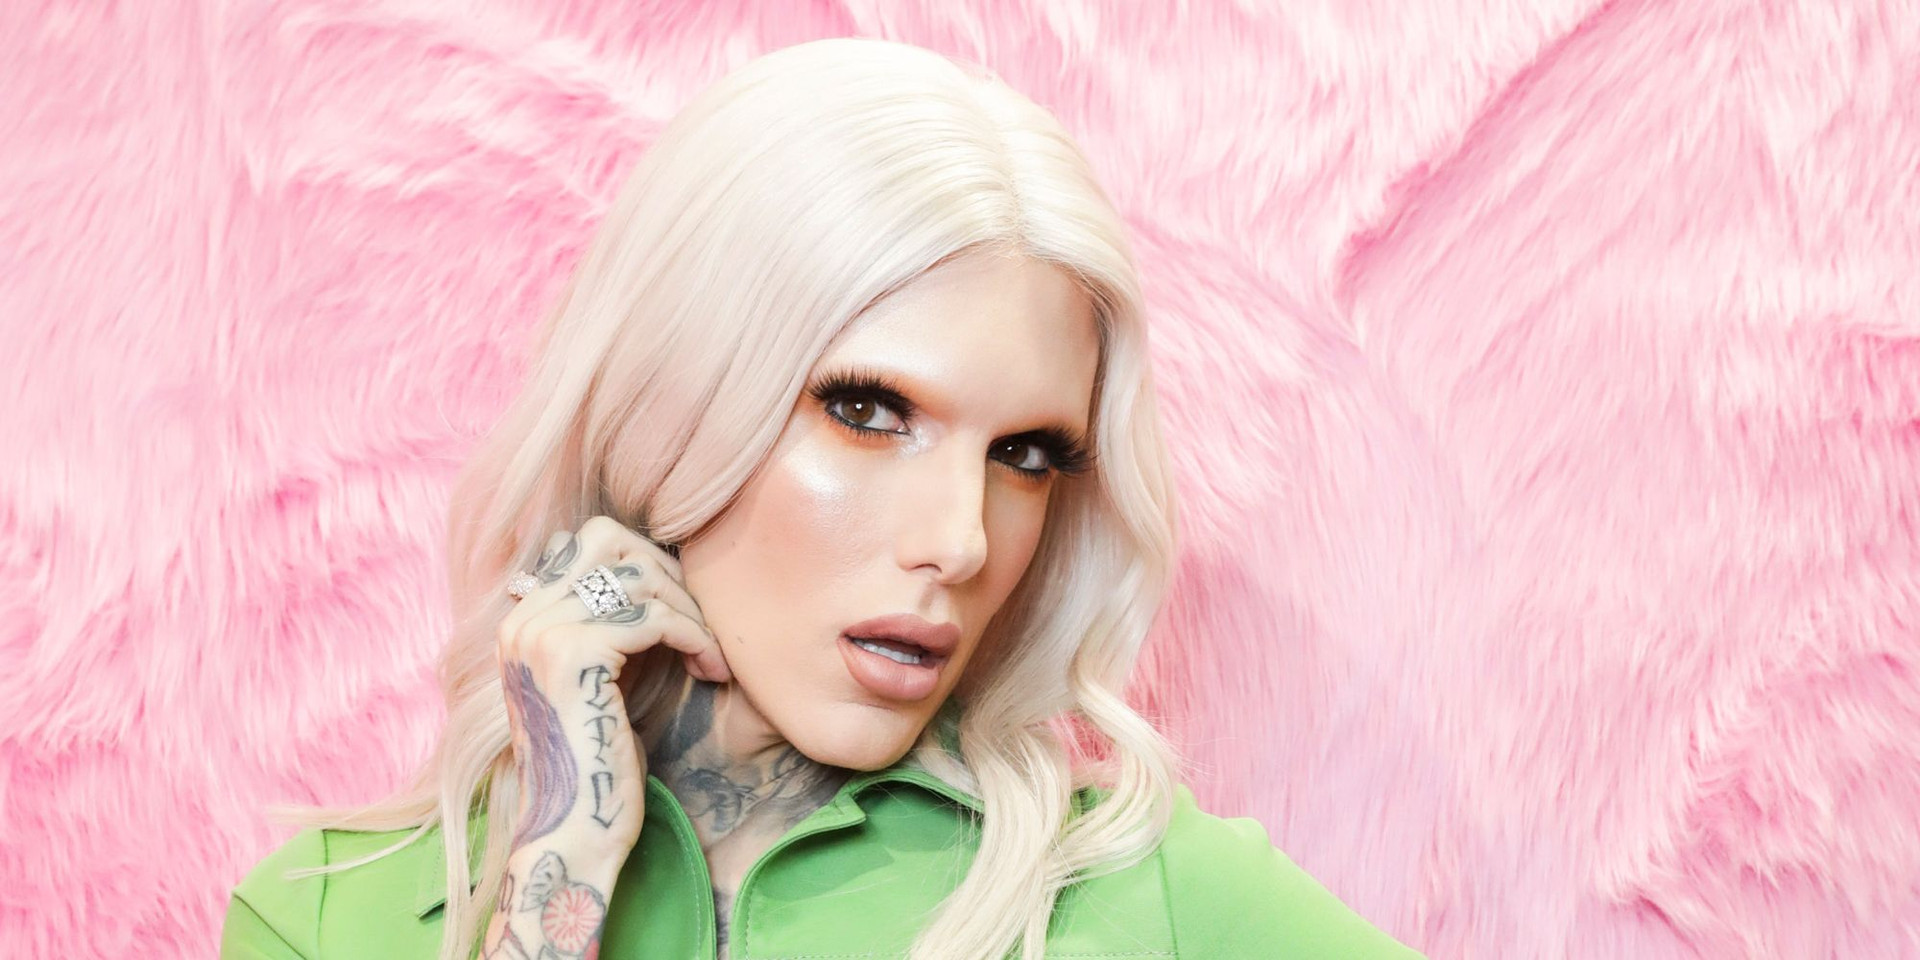 How Much Does Jeffree Star Earn - You Won't Believe How Much Jeffree Star Is Paid To Feature A Product